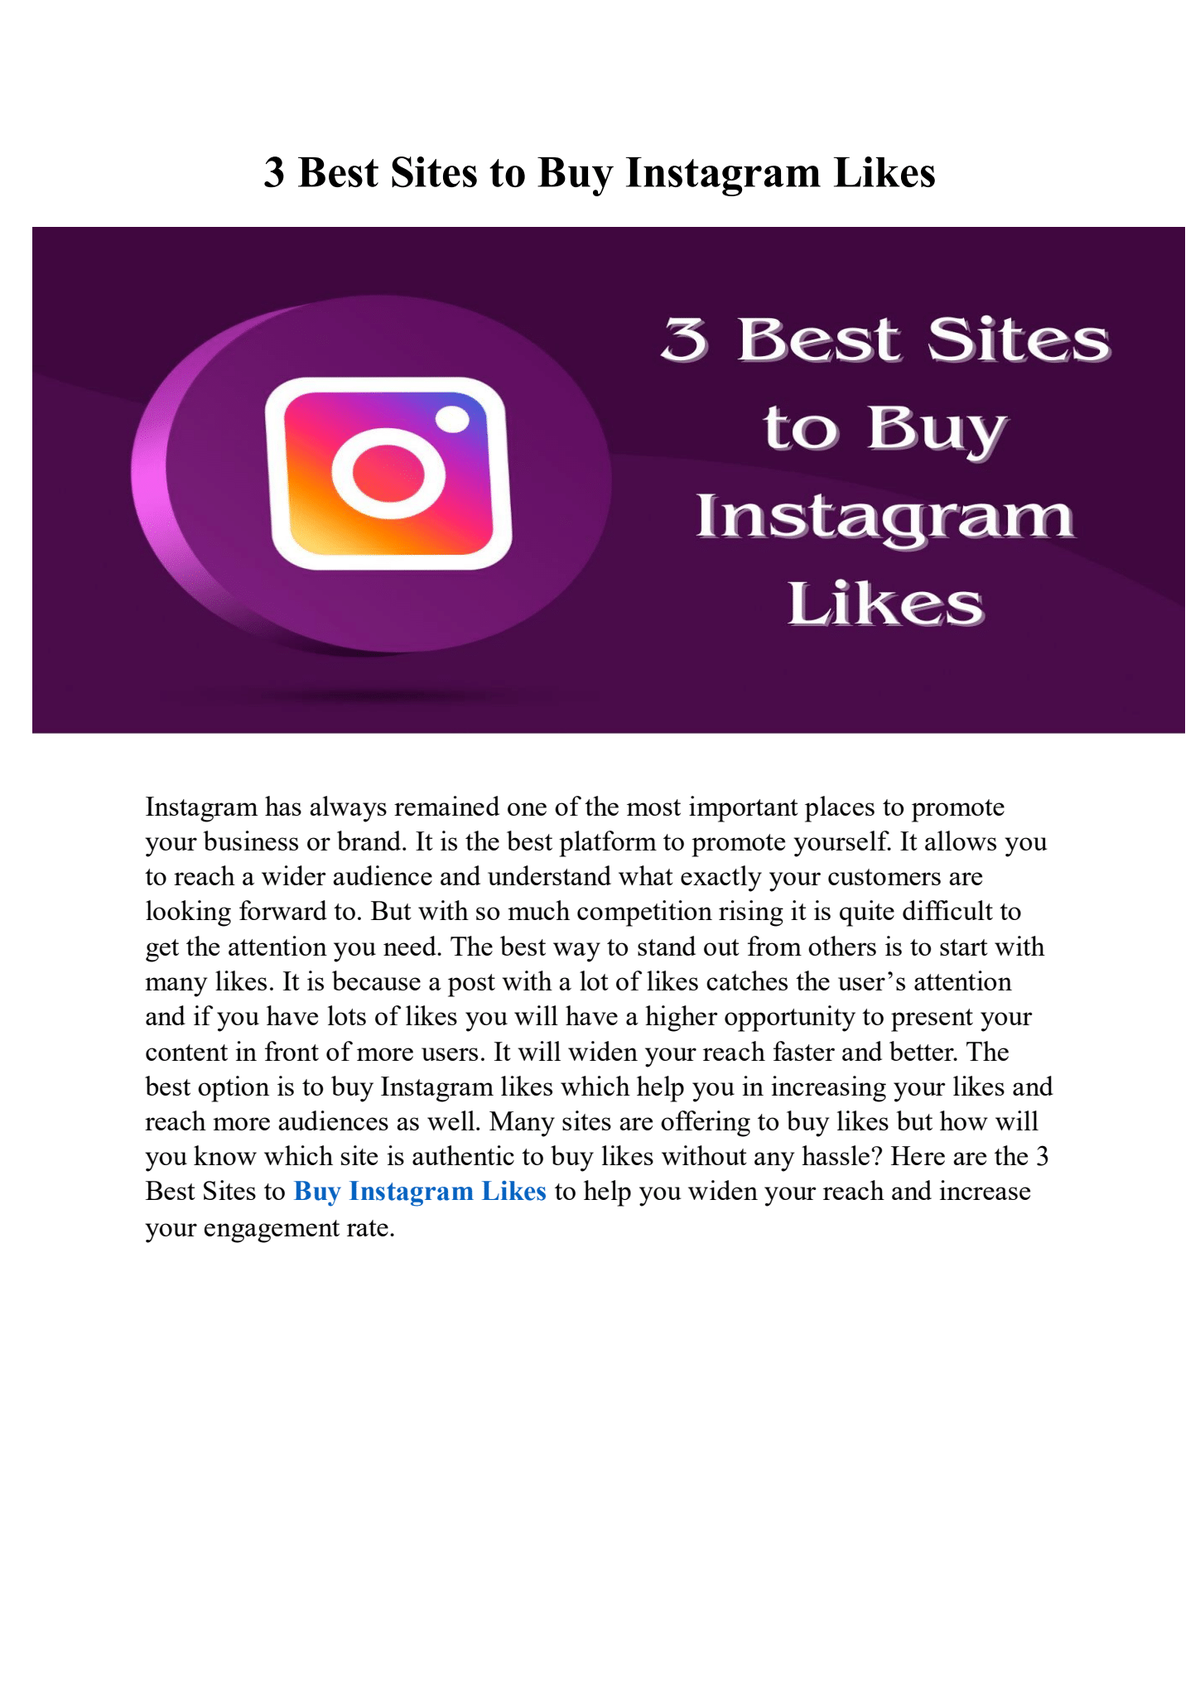 Dropbox - 3 Best Sites To Buy Instagram Likes.pdf - Simplify your life